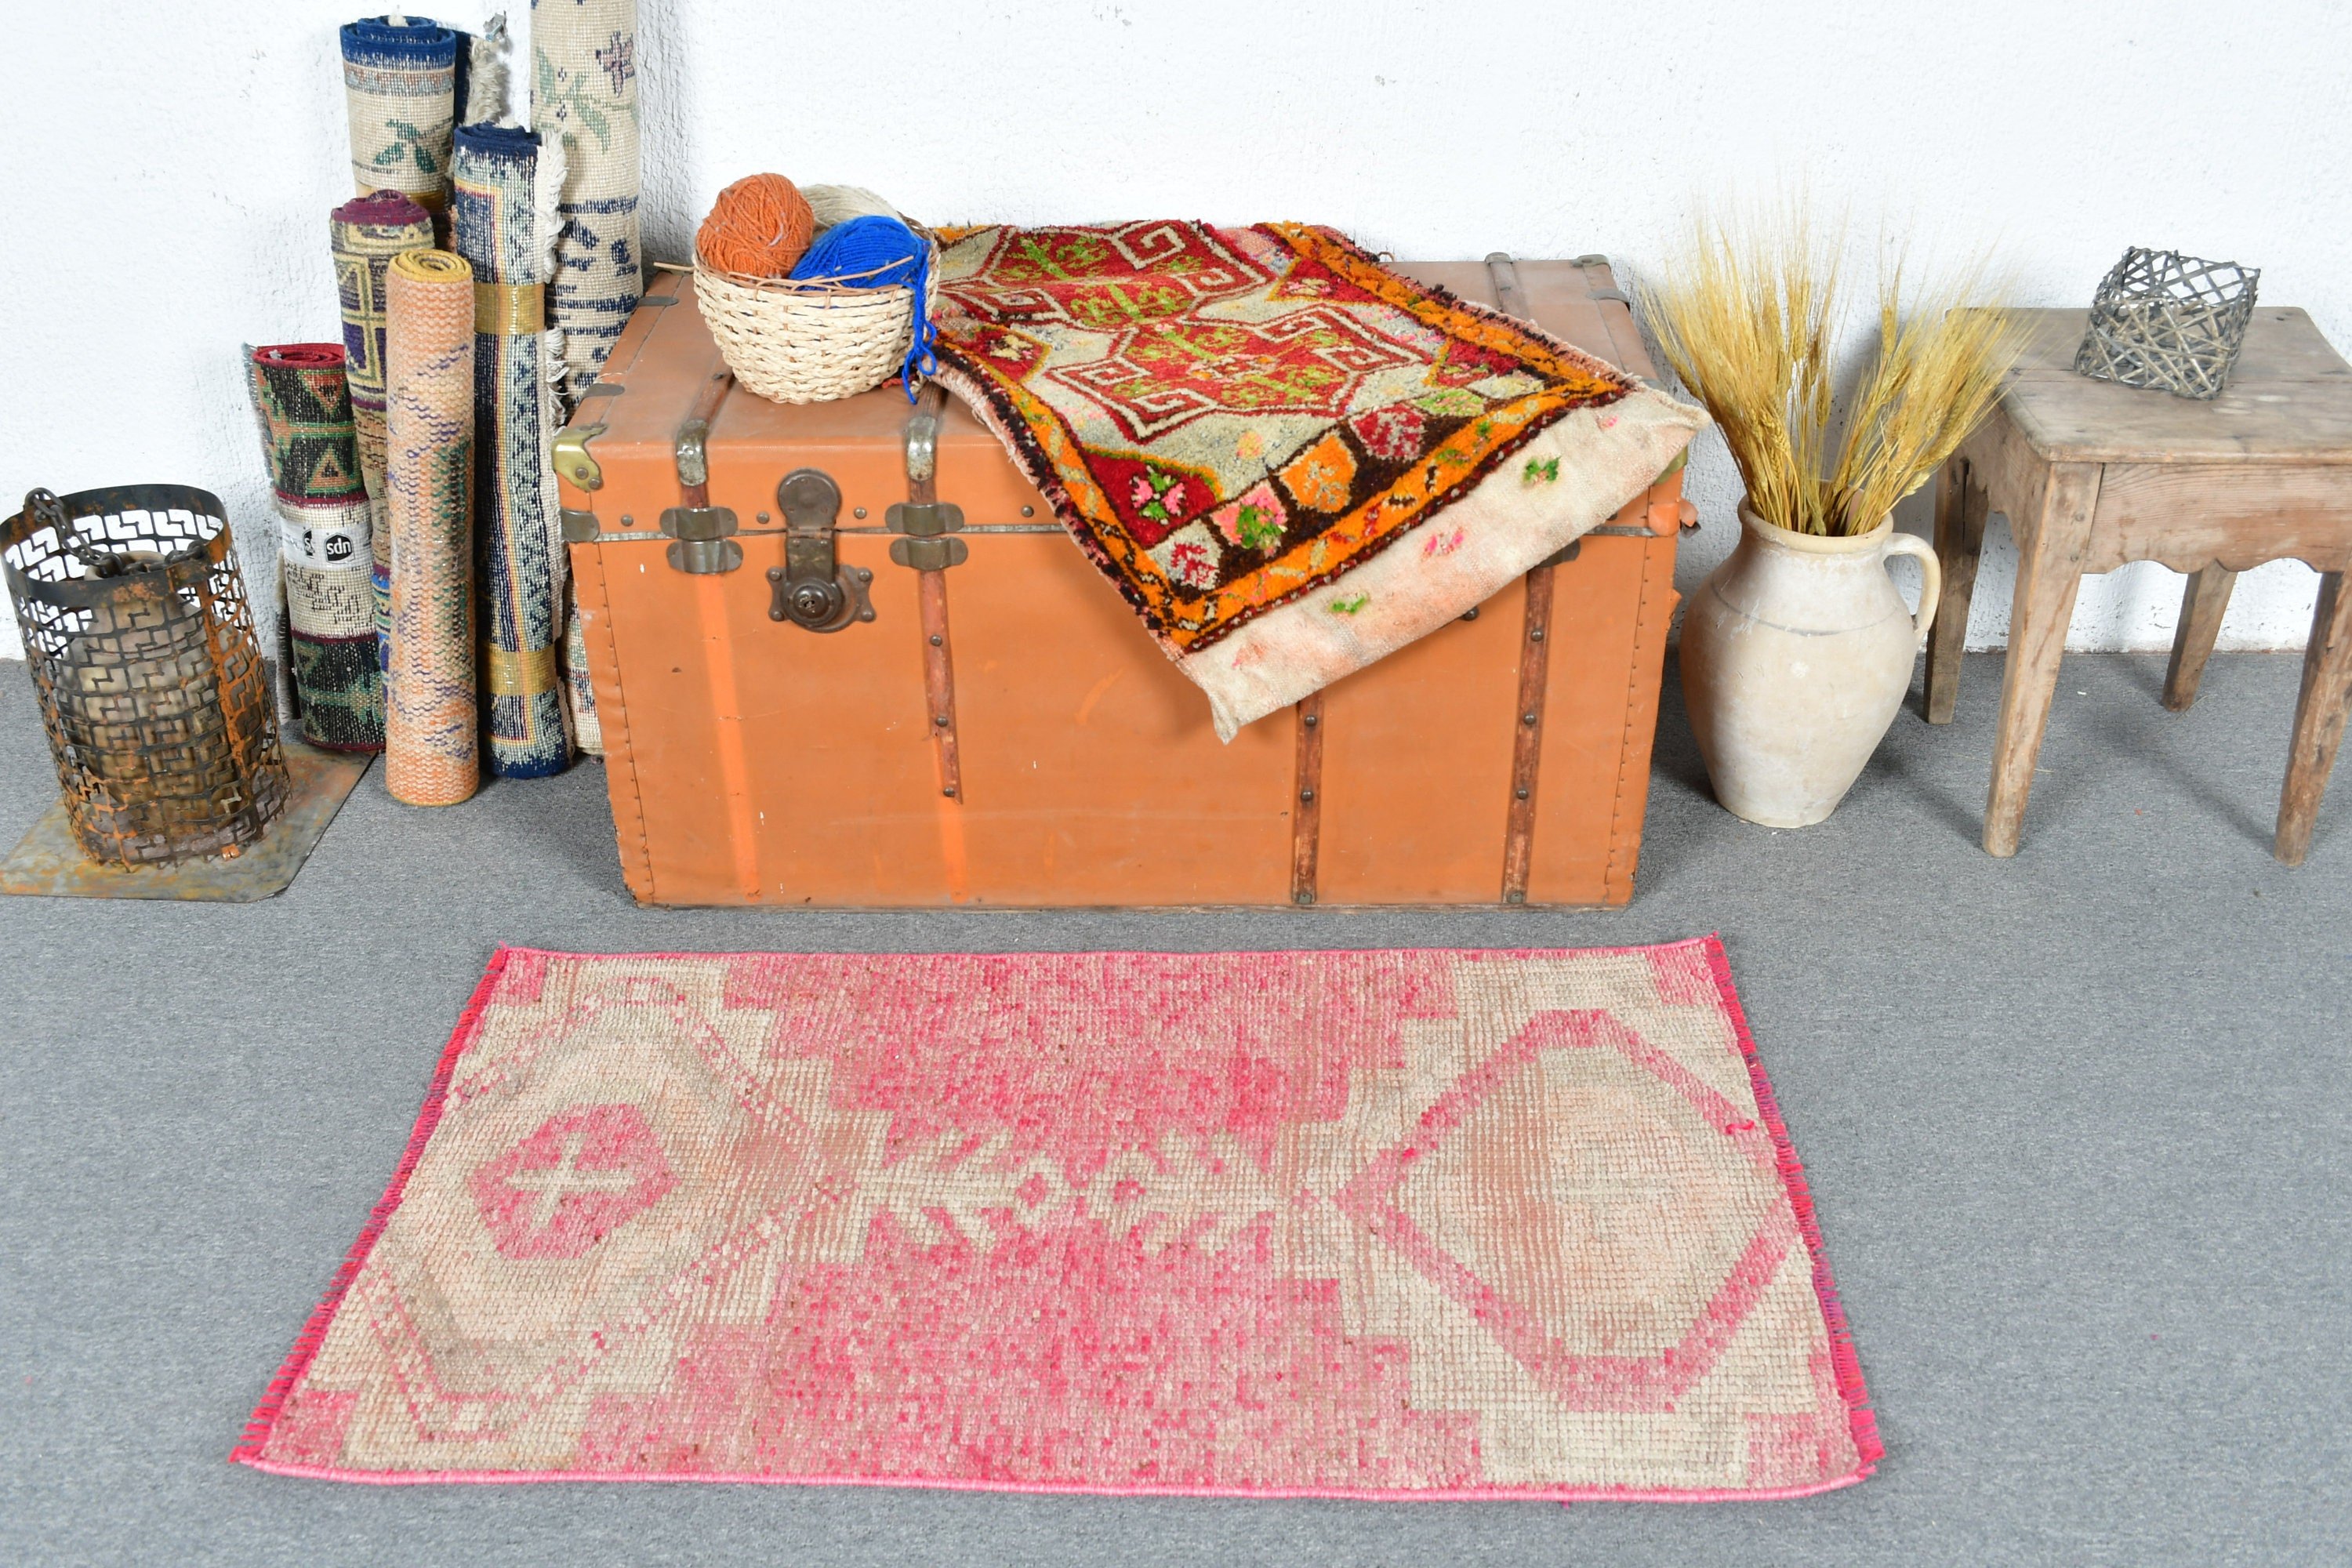 Pink Cool Rug, Oushak Rugs, Door Mat Rug, Decorative Rug, Antique Rug, Turkish Rugs, Wall Hanging Rugs, 2.2x3.8 ft Small Rugs, Vintage Rugs